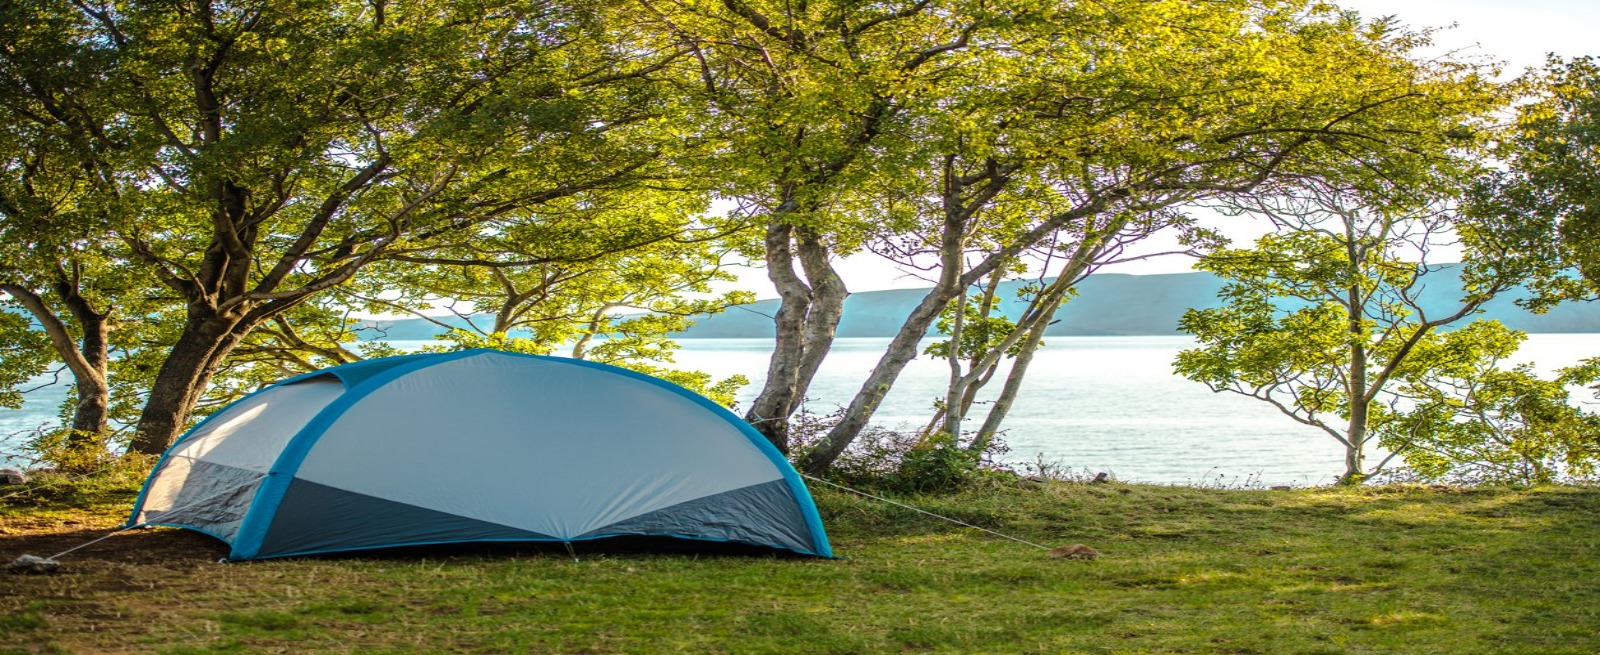 A tent by the lake